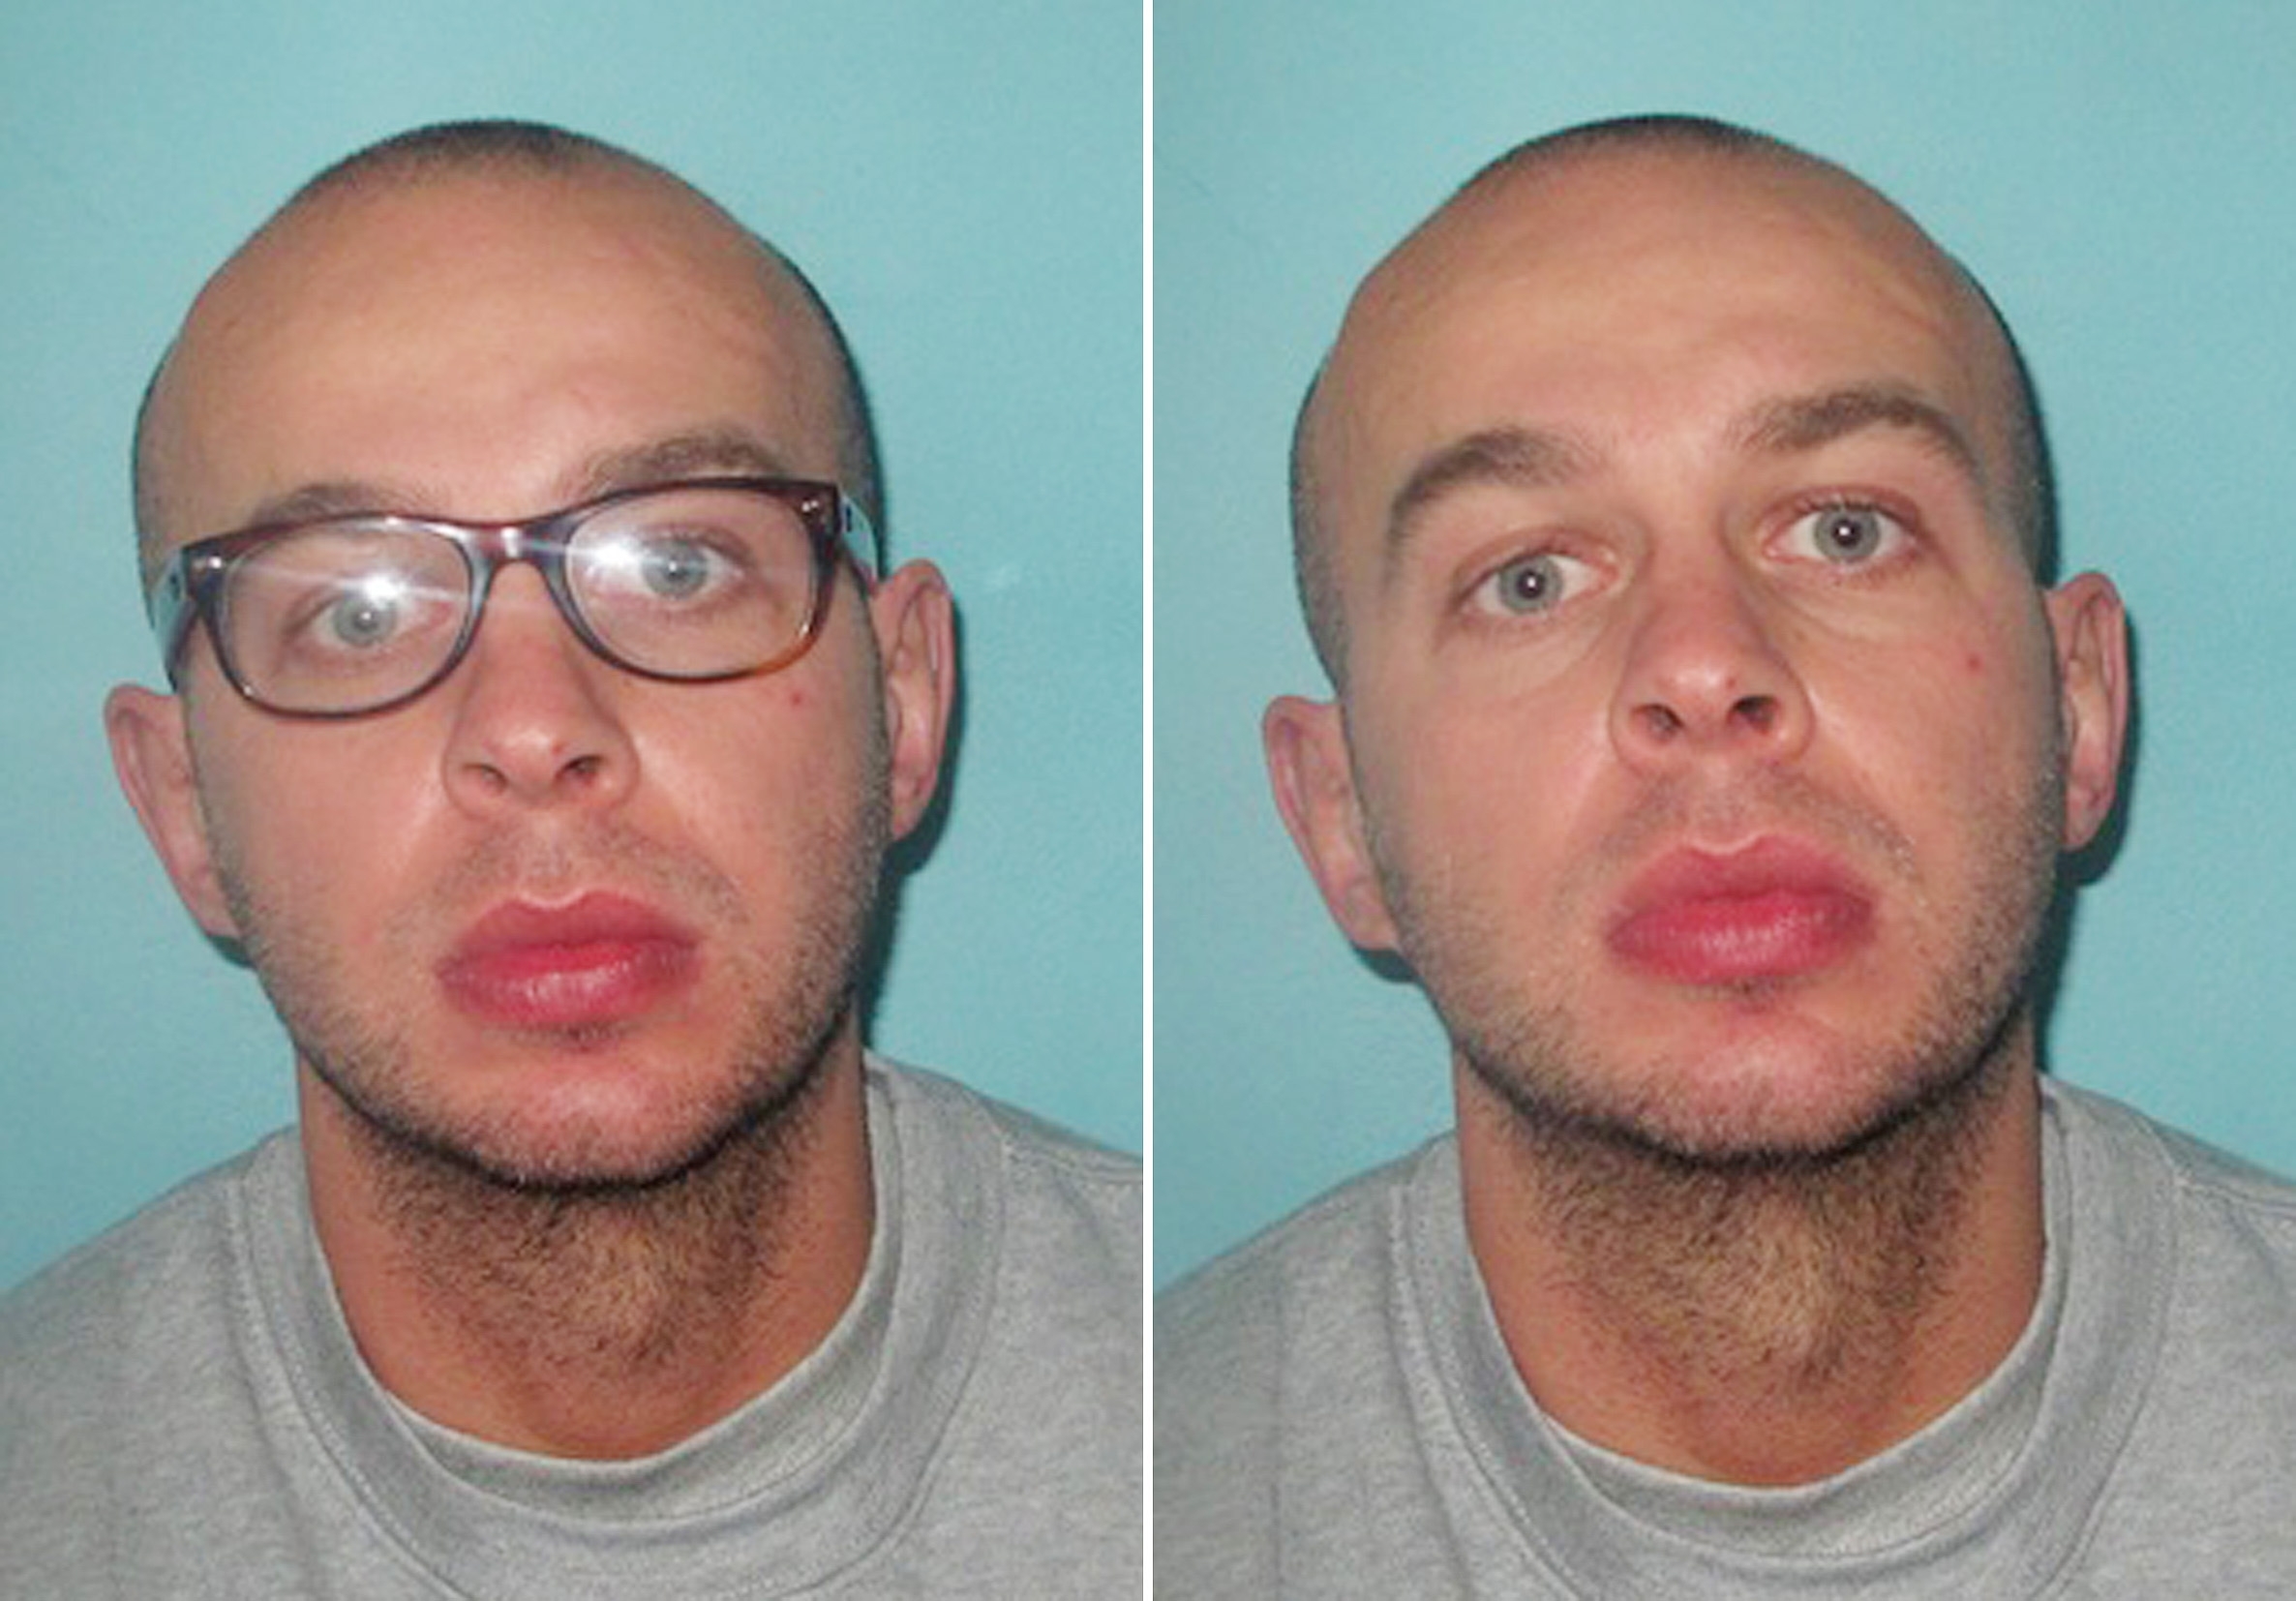 Prisoner Ryan Byrne, 34, who is being sought by police after being mistakenly freed from Wandsworth Prison